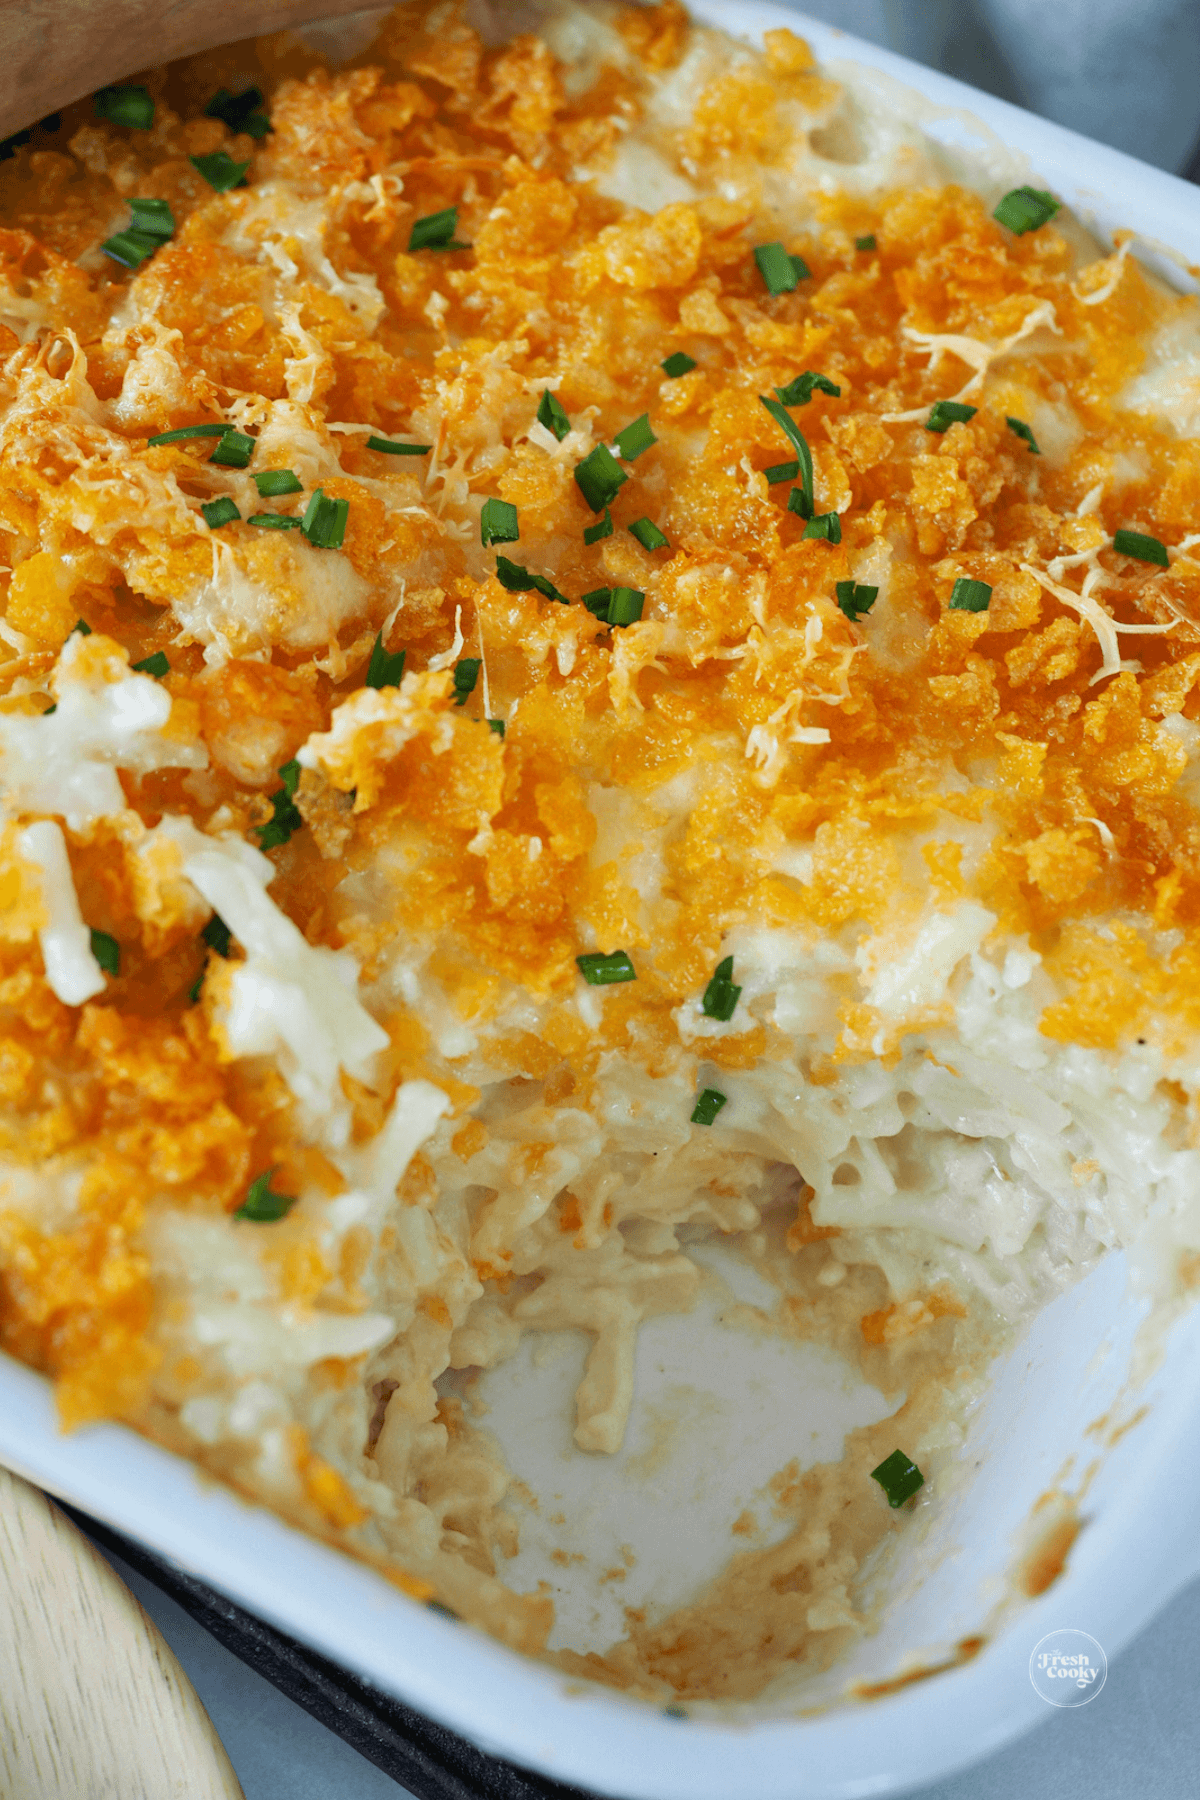 Hashbrown casserole in dish with serving removed, topped with corn flake topping.